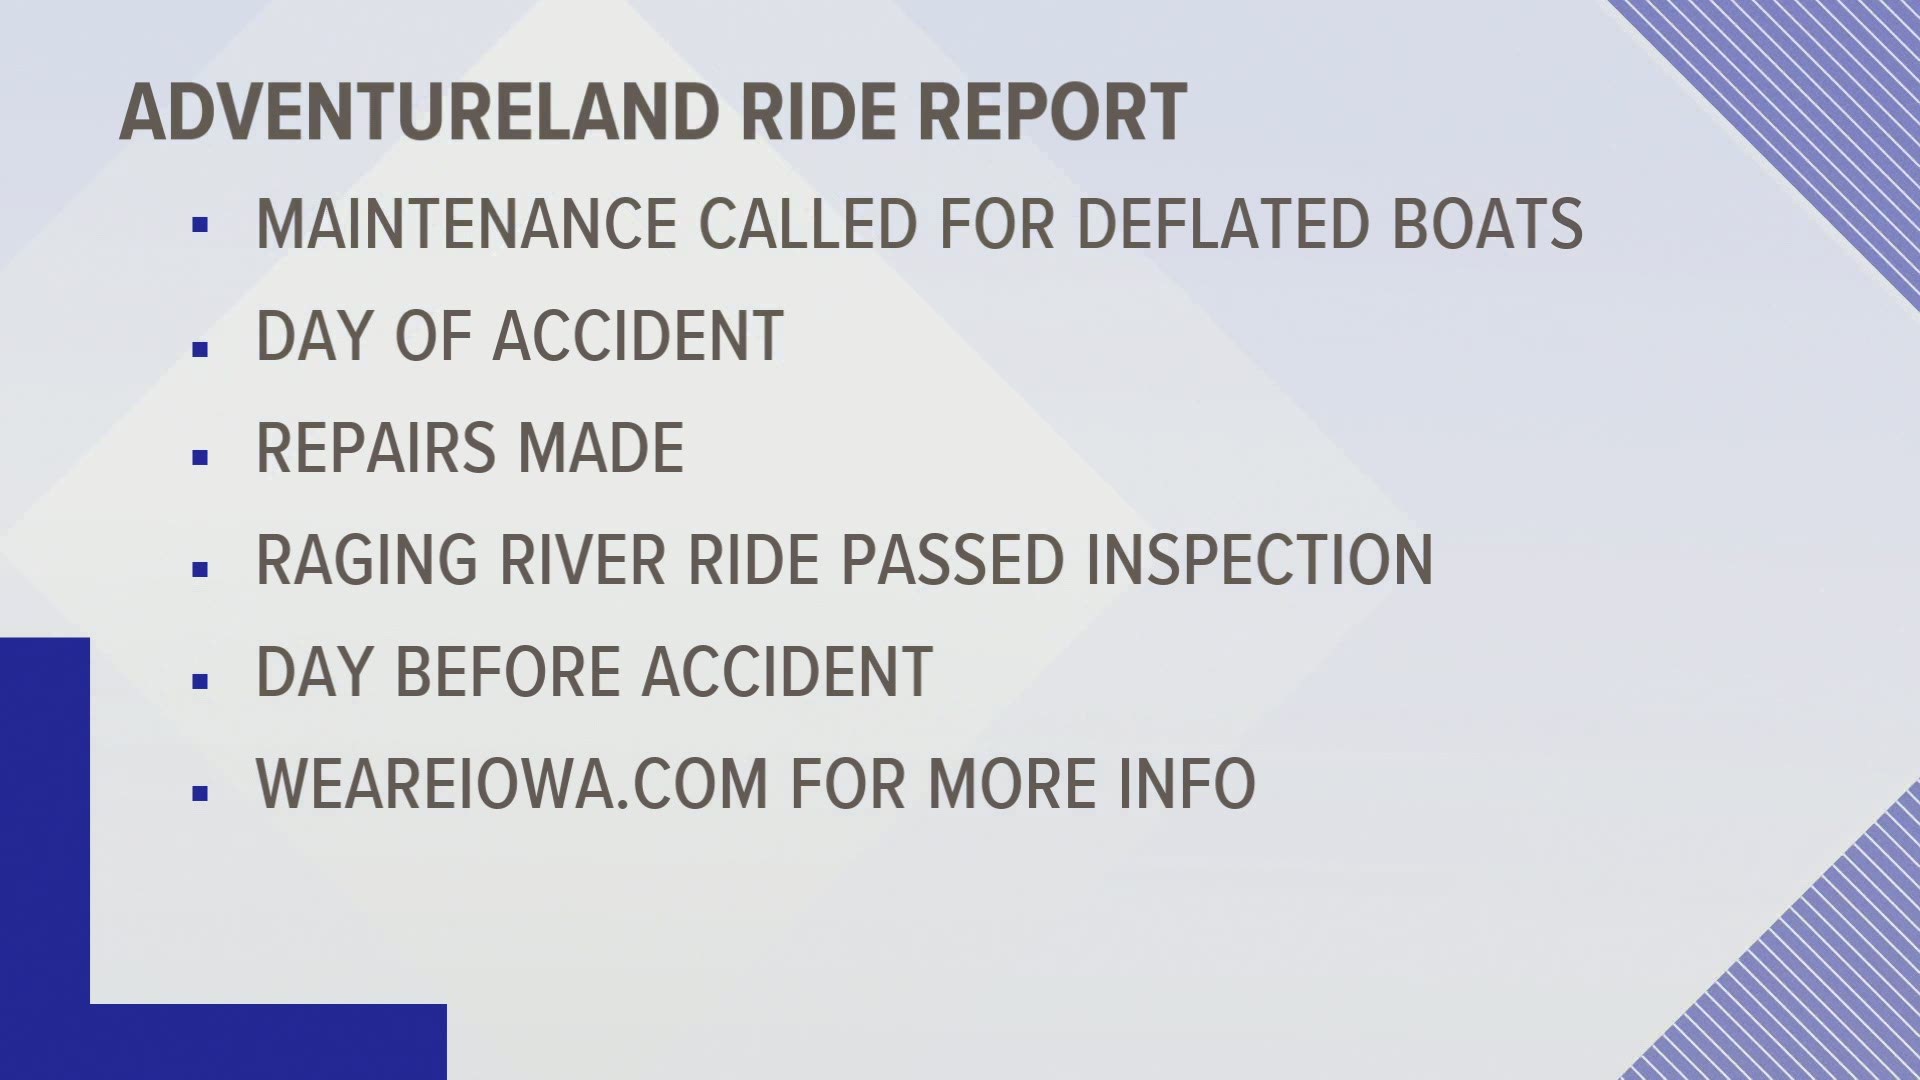 New details emerge in accident report following a deadly accident on Adventureland ride